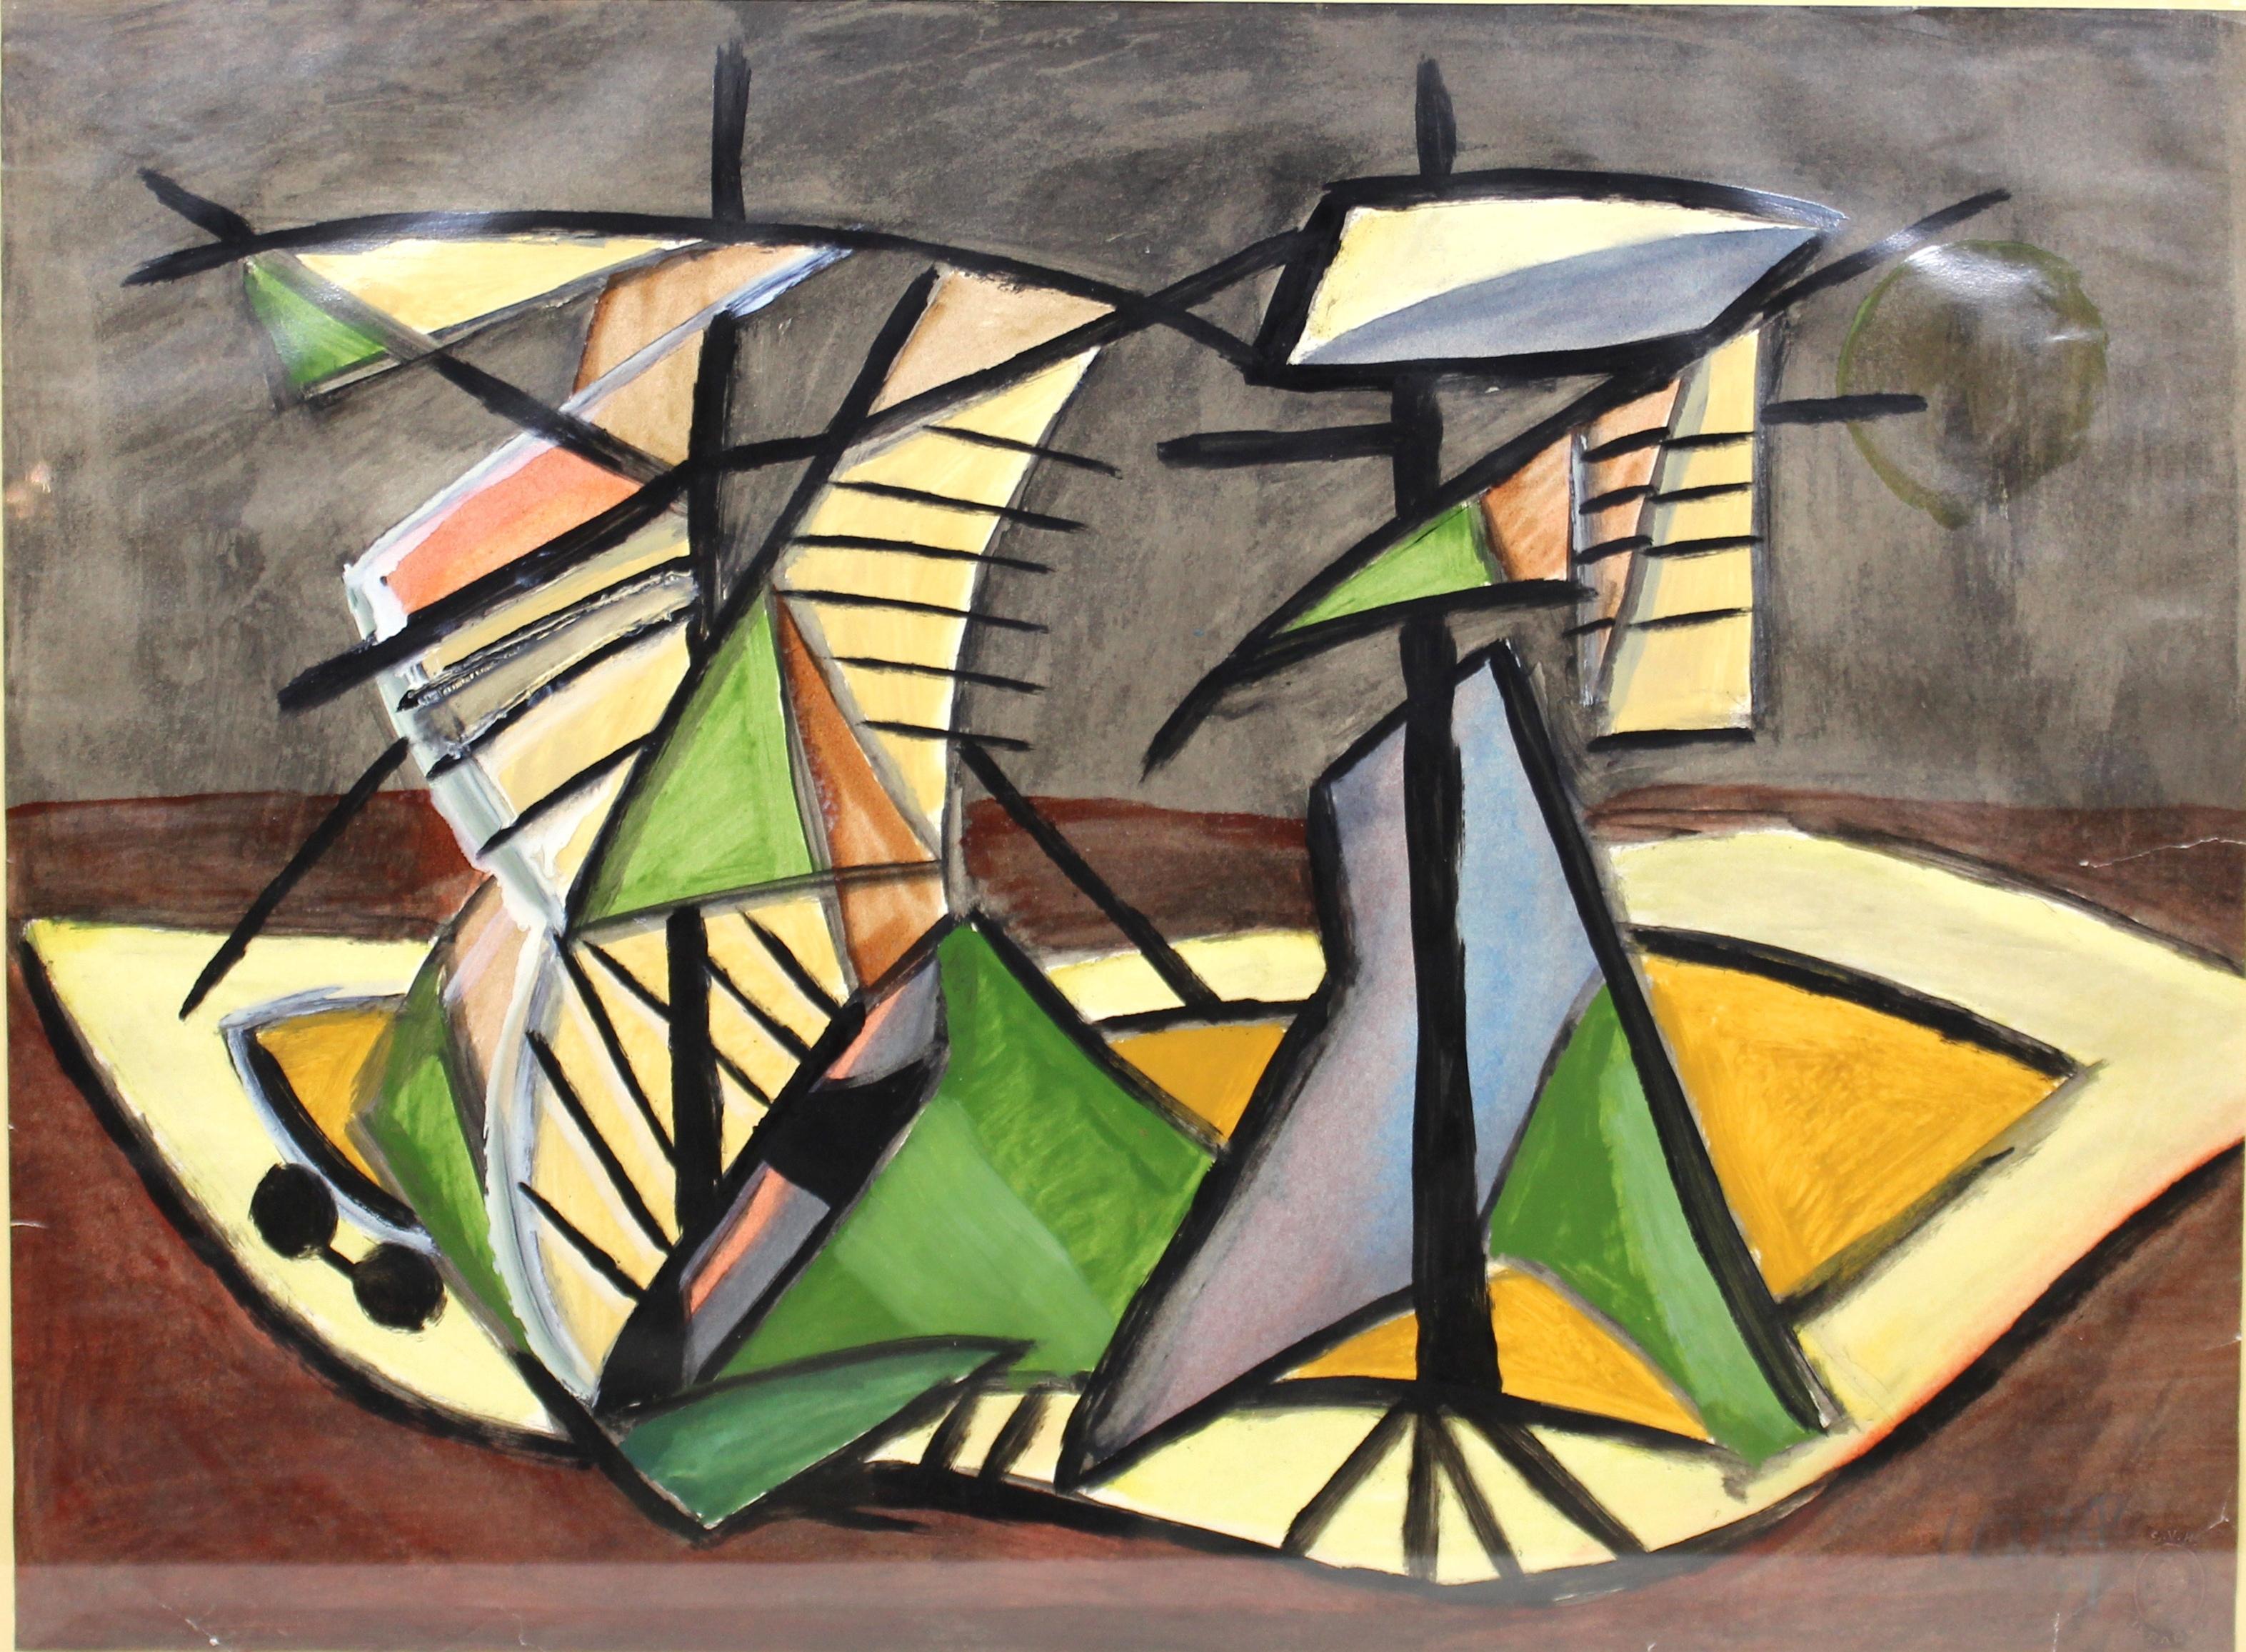 Dutch Mid-Century Modern abstract oil on artist paper still life painting, created by Lex Metz (Dutch, 1913-1986). Metz was a Dutch photographer, draftsman, graphic designer and illustrator who also taught at the New Art School in Amsterdam, the